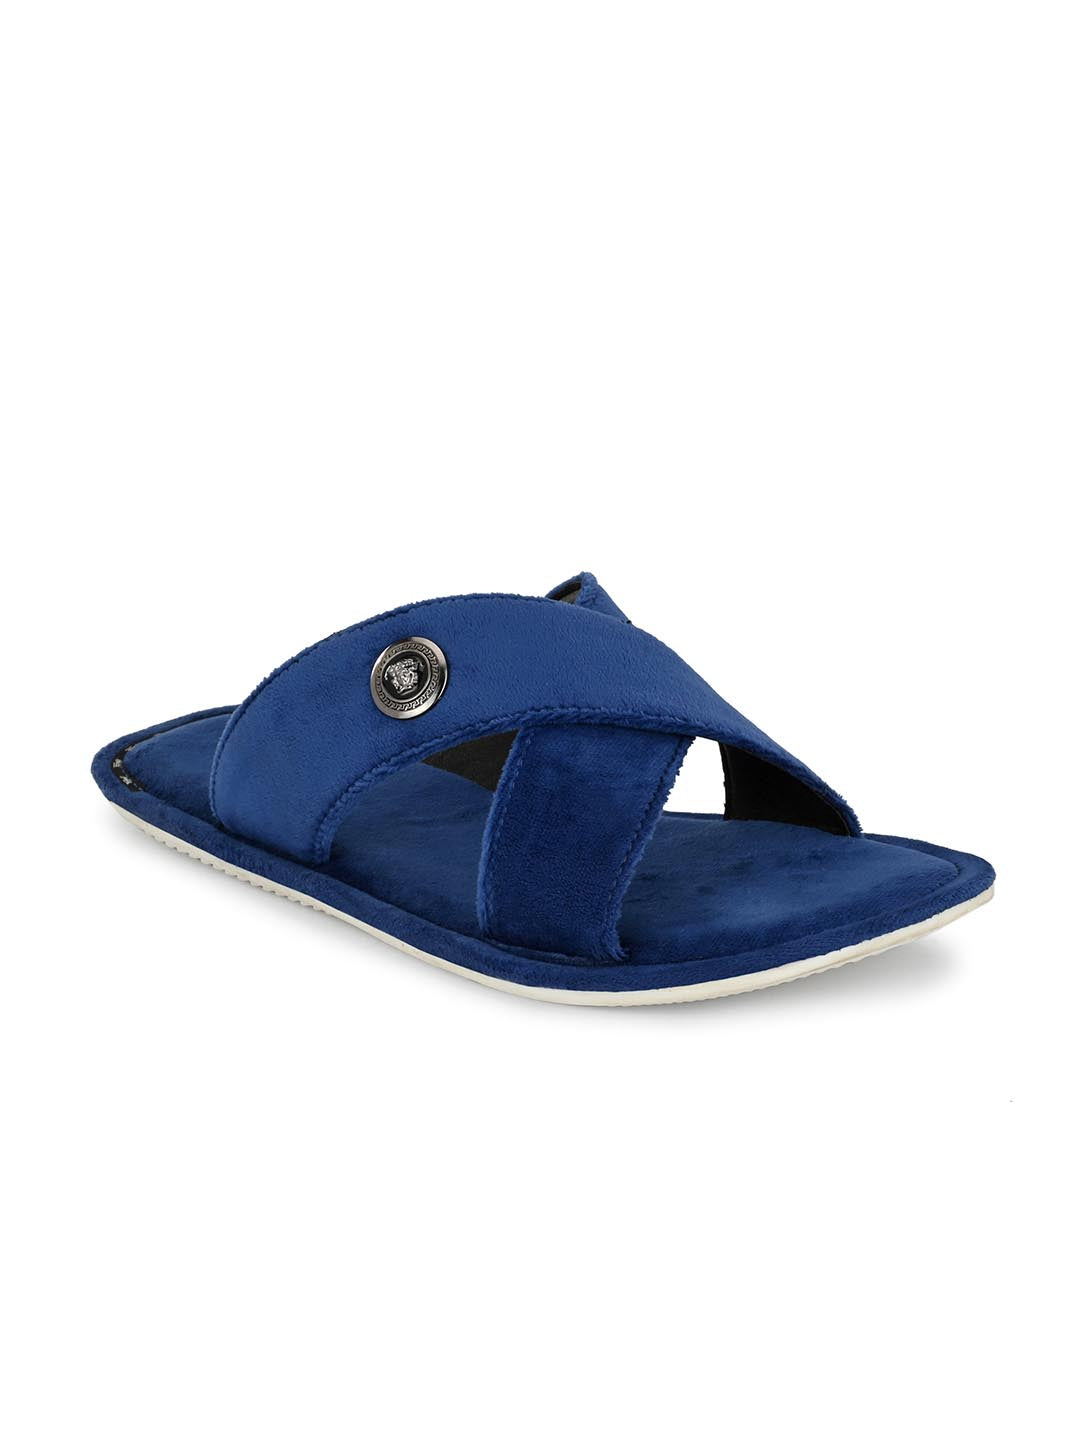 The Best Outdoor Slippers for Men and Women | OluKai